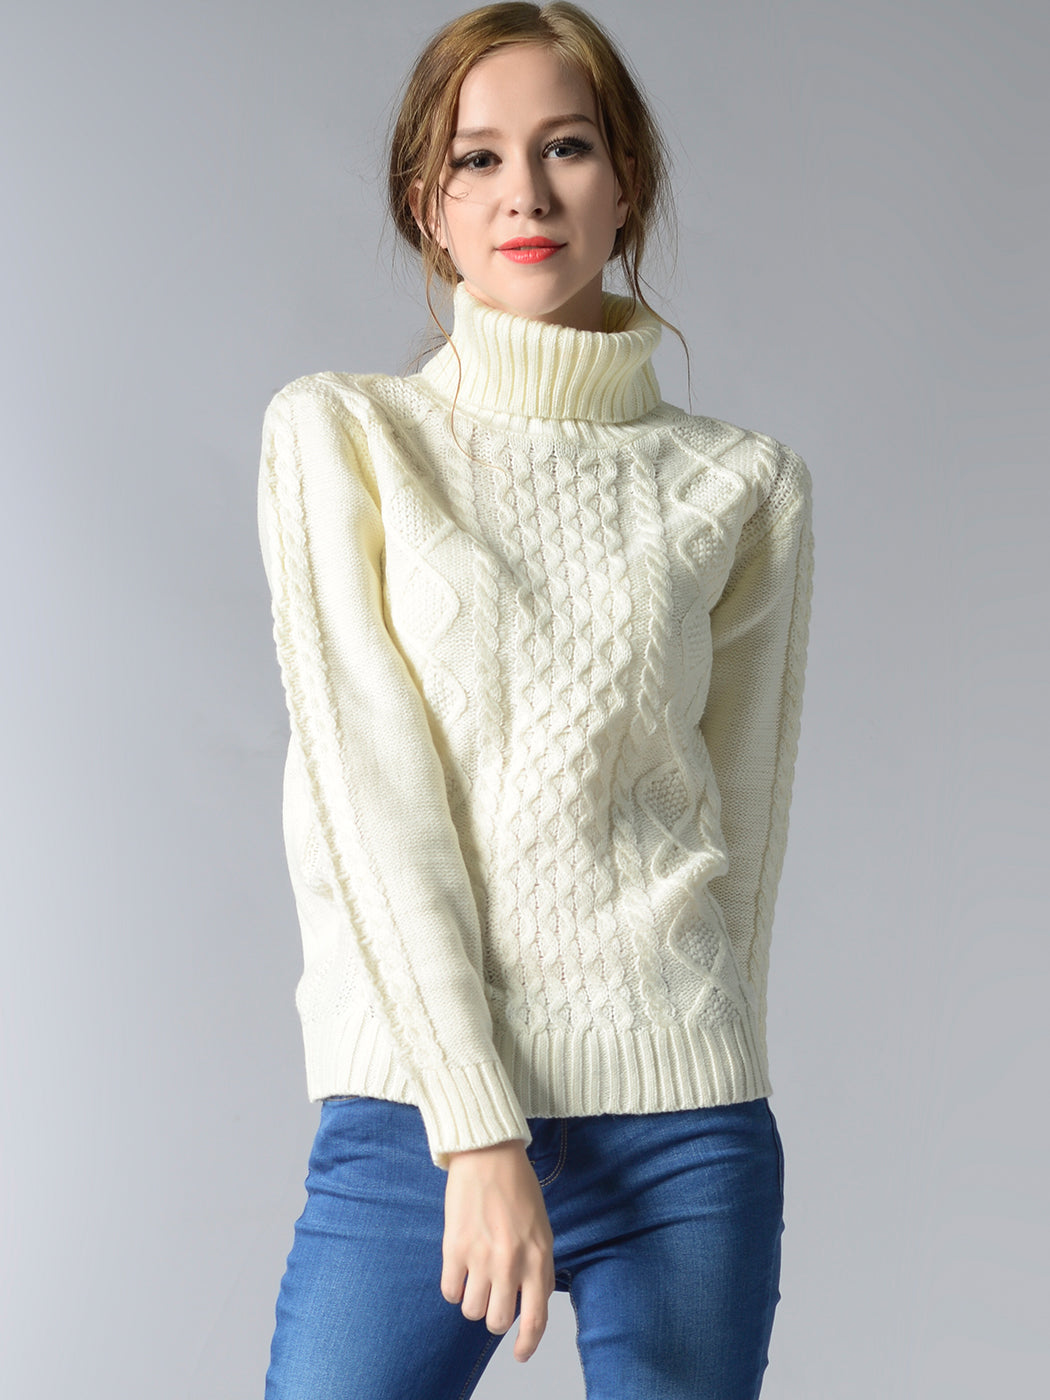 Cable Knit Turtle Neck Stretch Long Sleeve Pullover Sweater